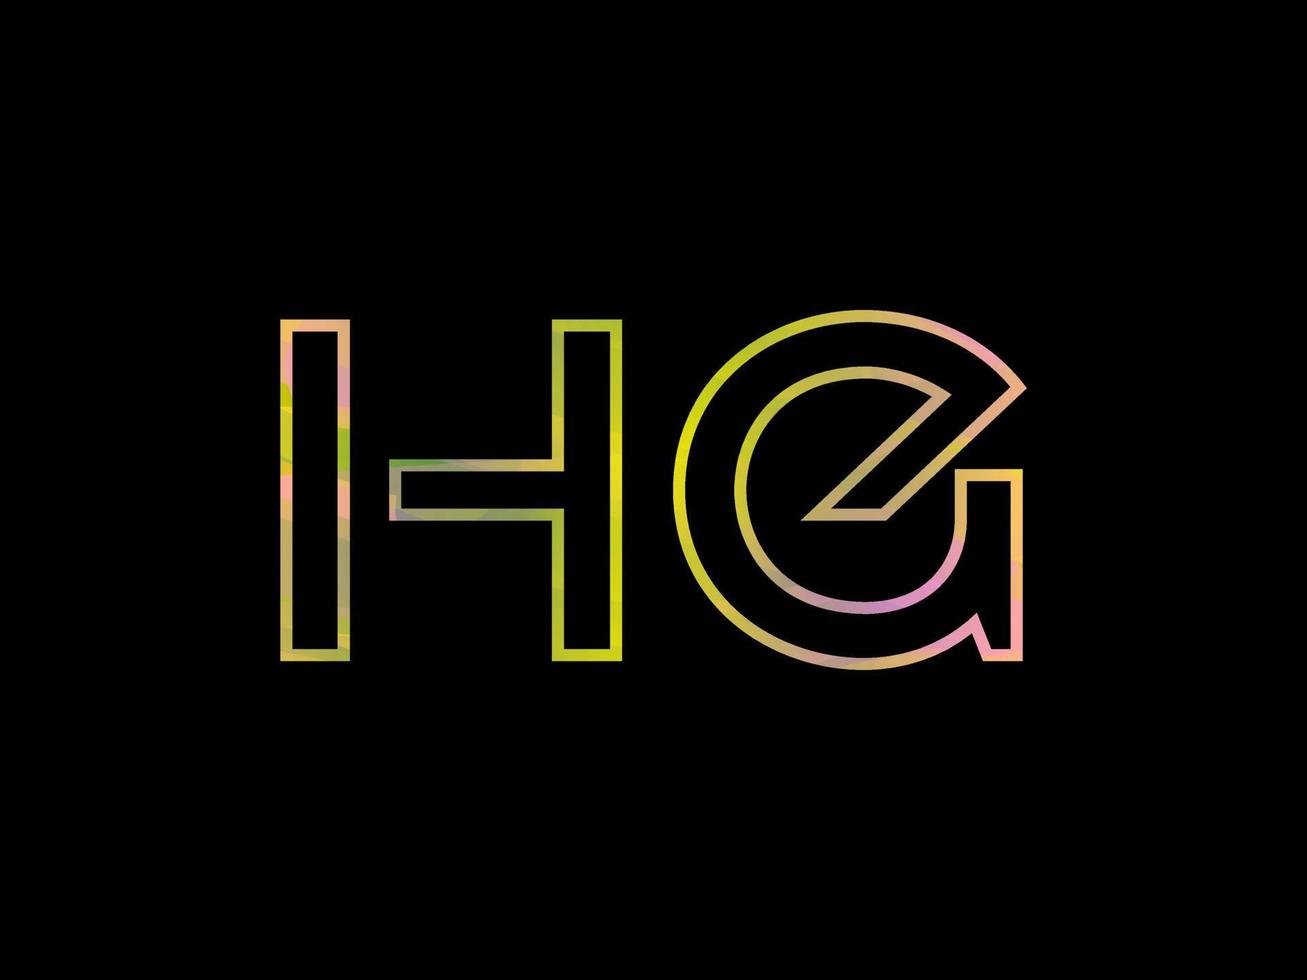 HG Letter Logo With Colorful Rainbow Texture Vector. Pro vector